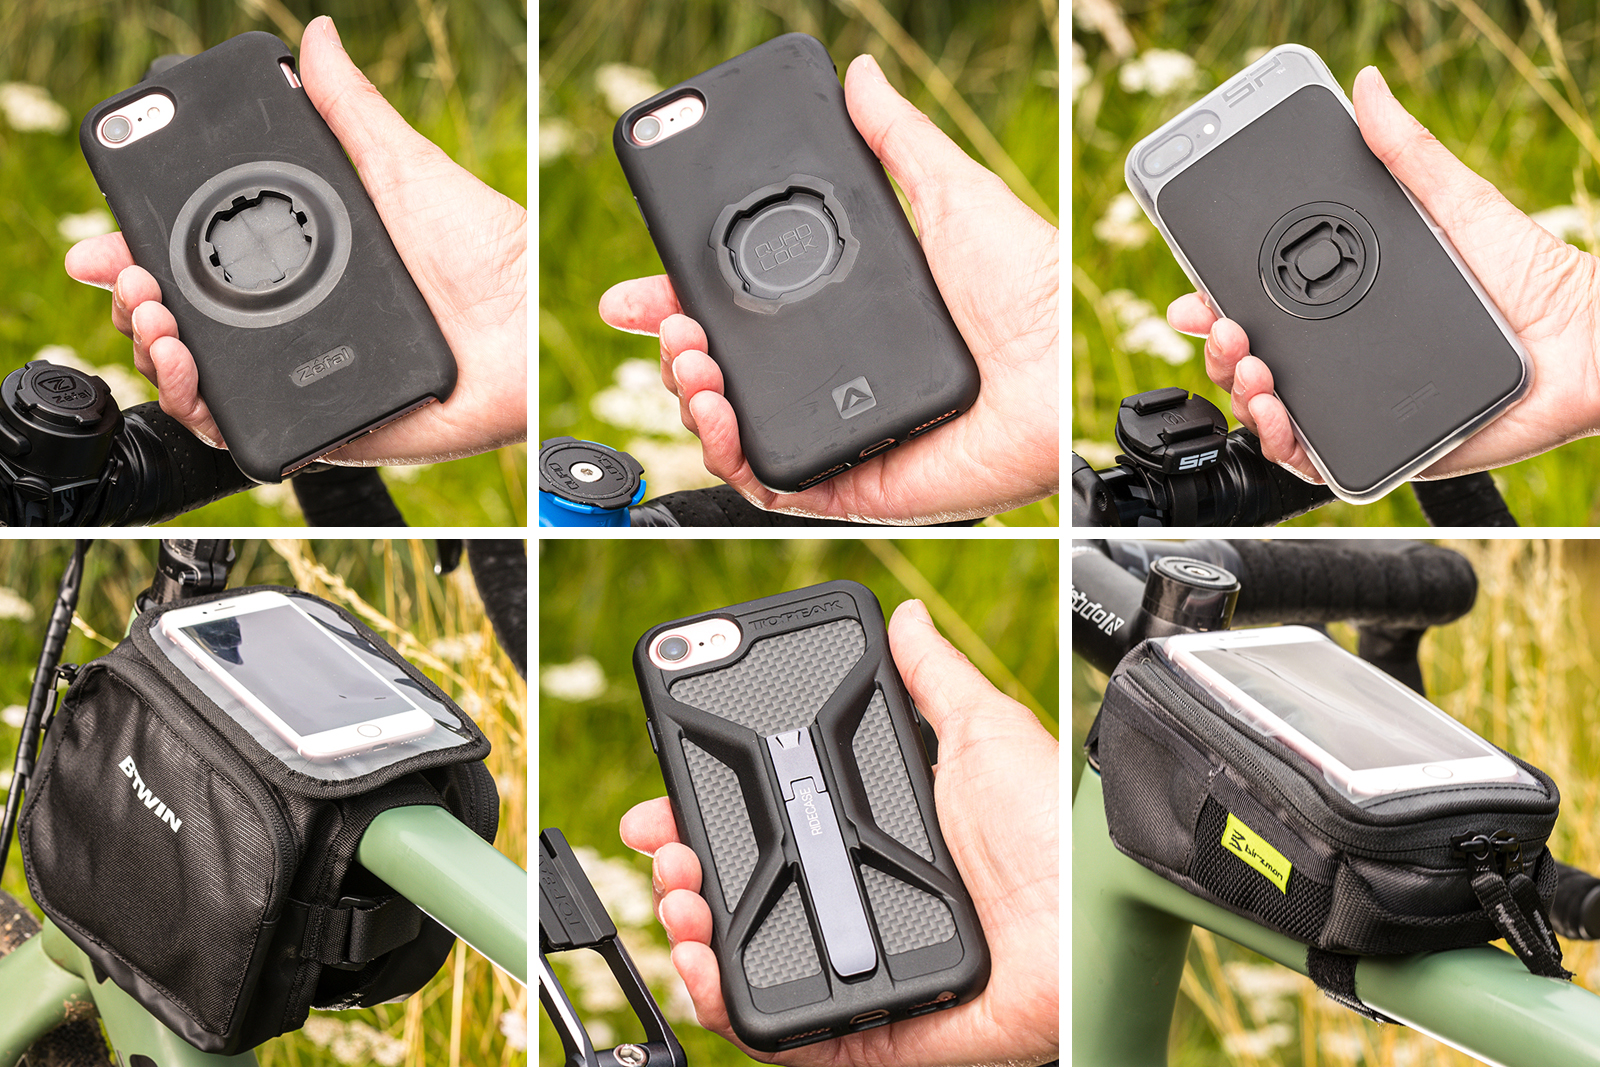 Best bike phone mount: 6 popular phone cases and holders tested